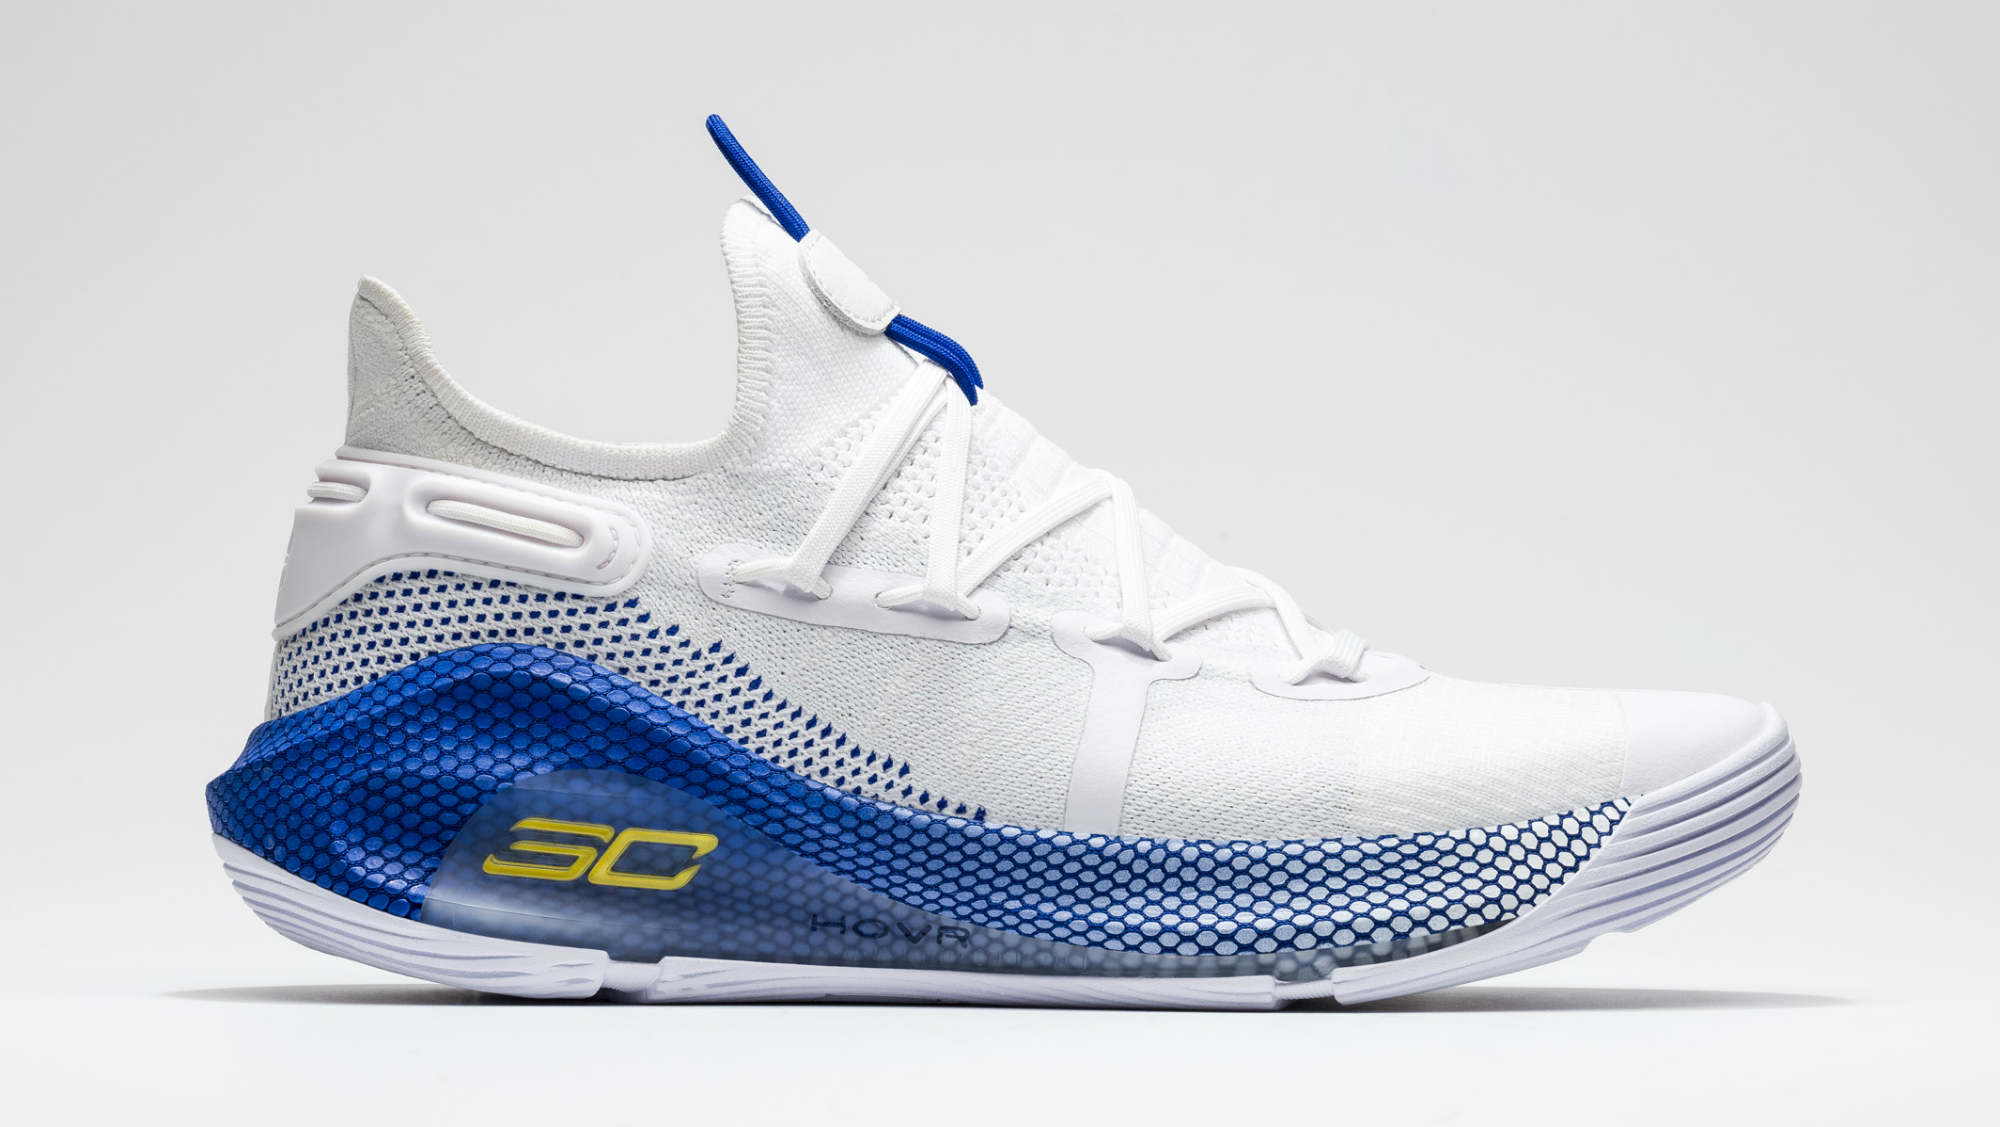 under armour curry 6 dub nation 3020612 103 release date